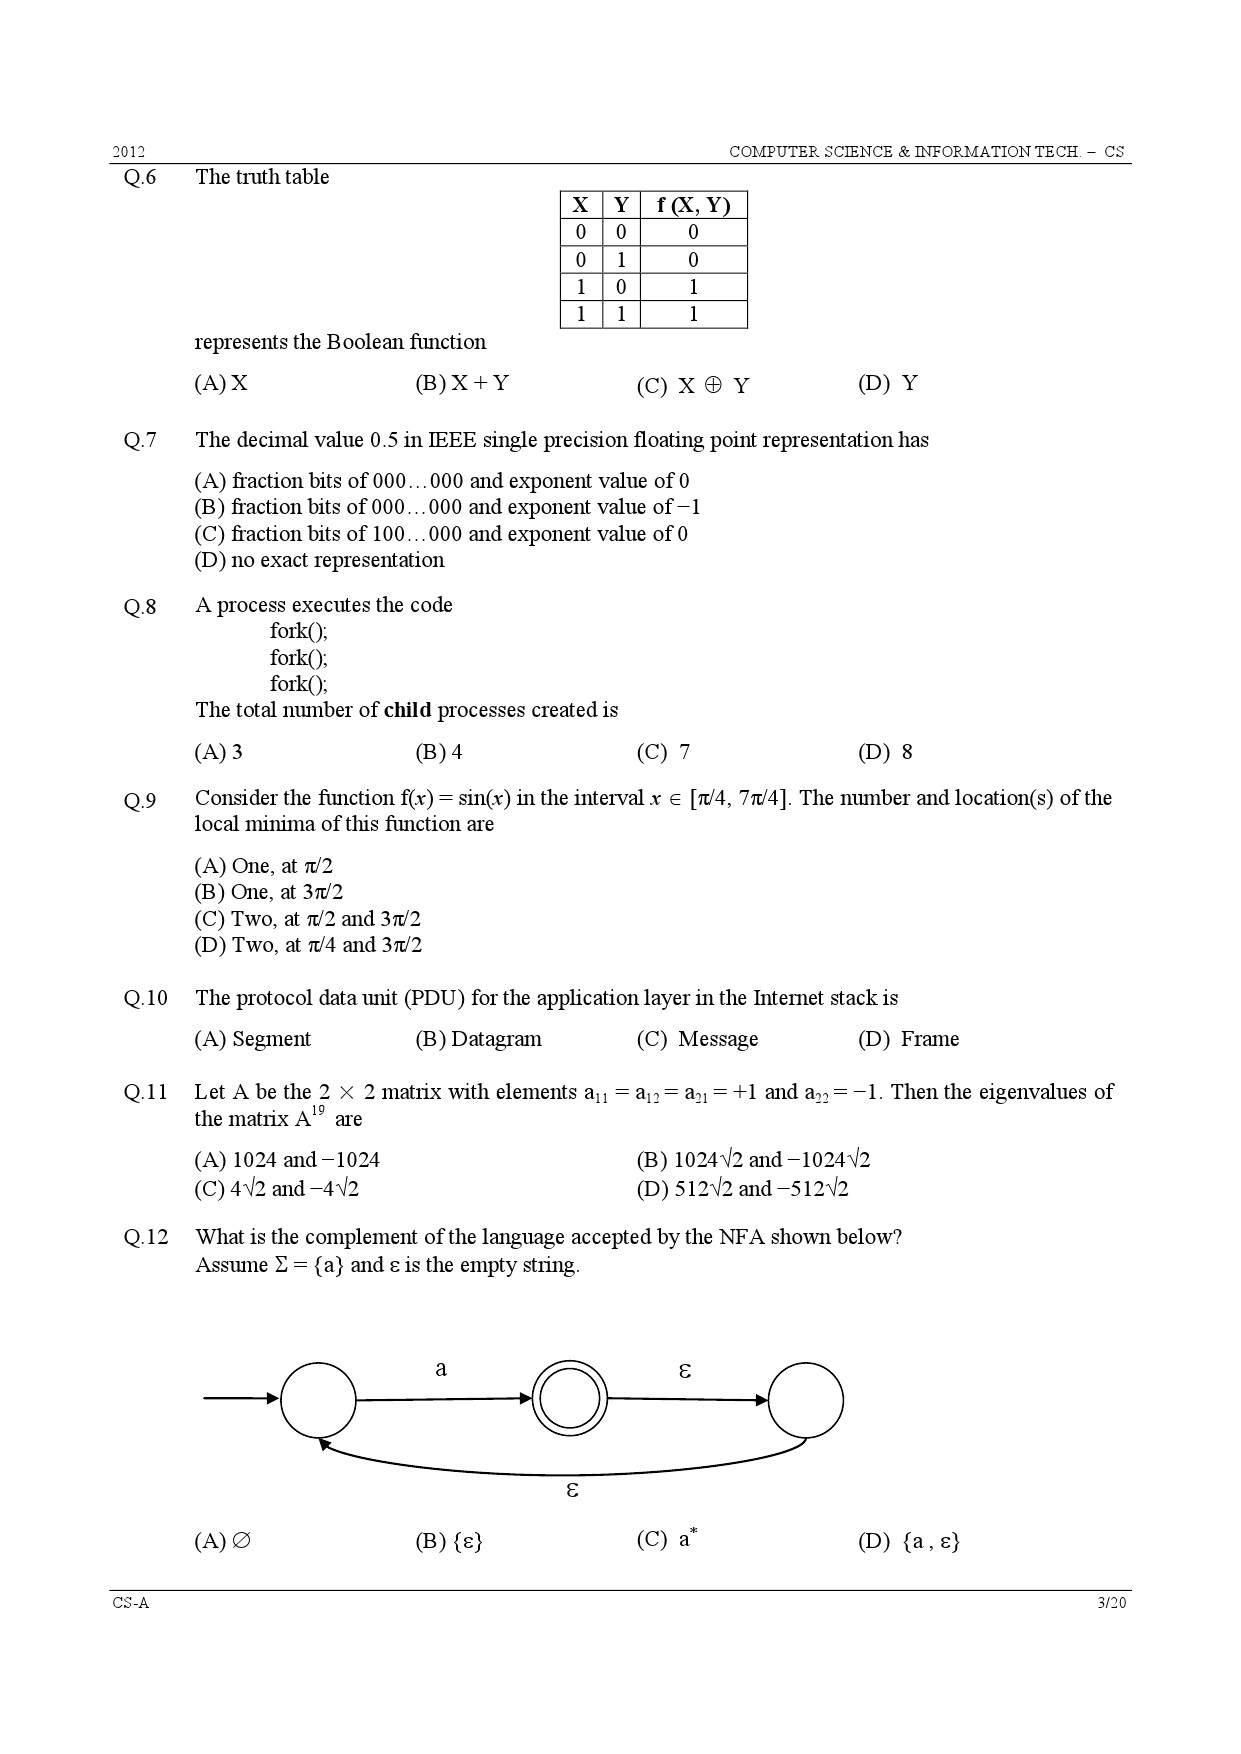 GATE Exam Question Paper 2012 Computer Science and Information Technology 3